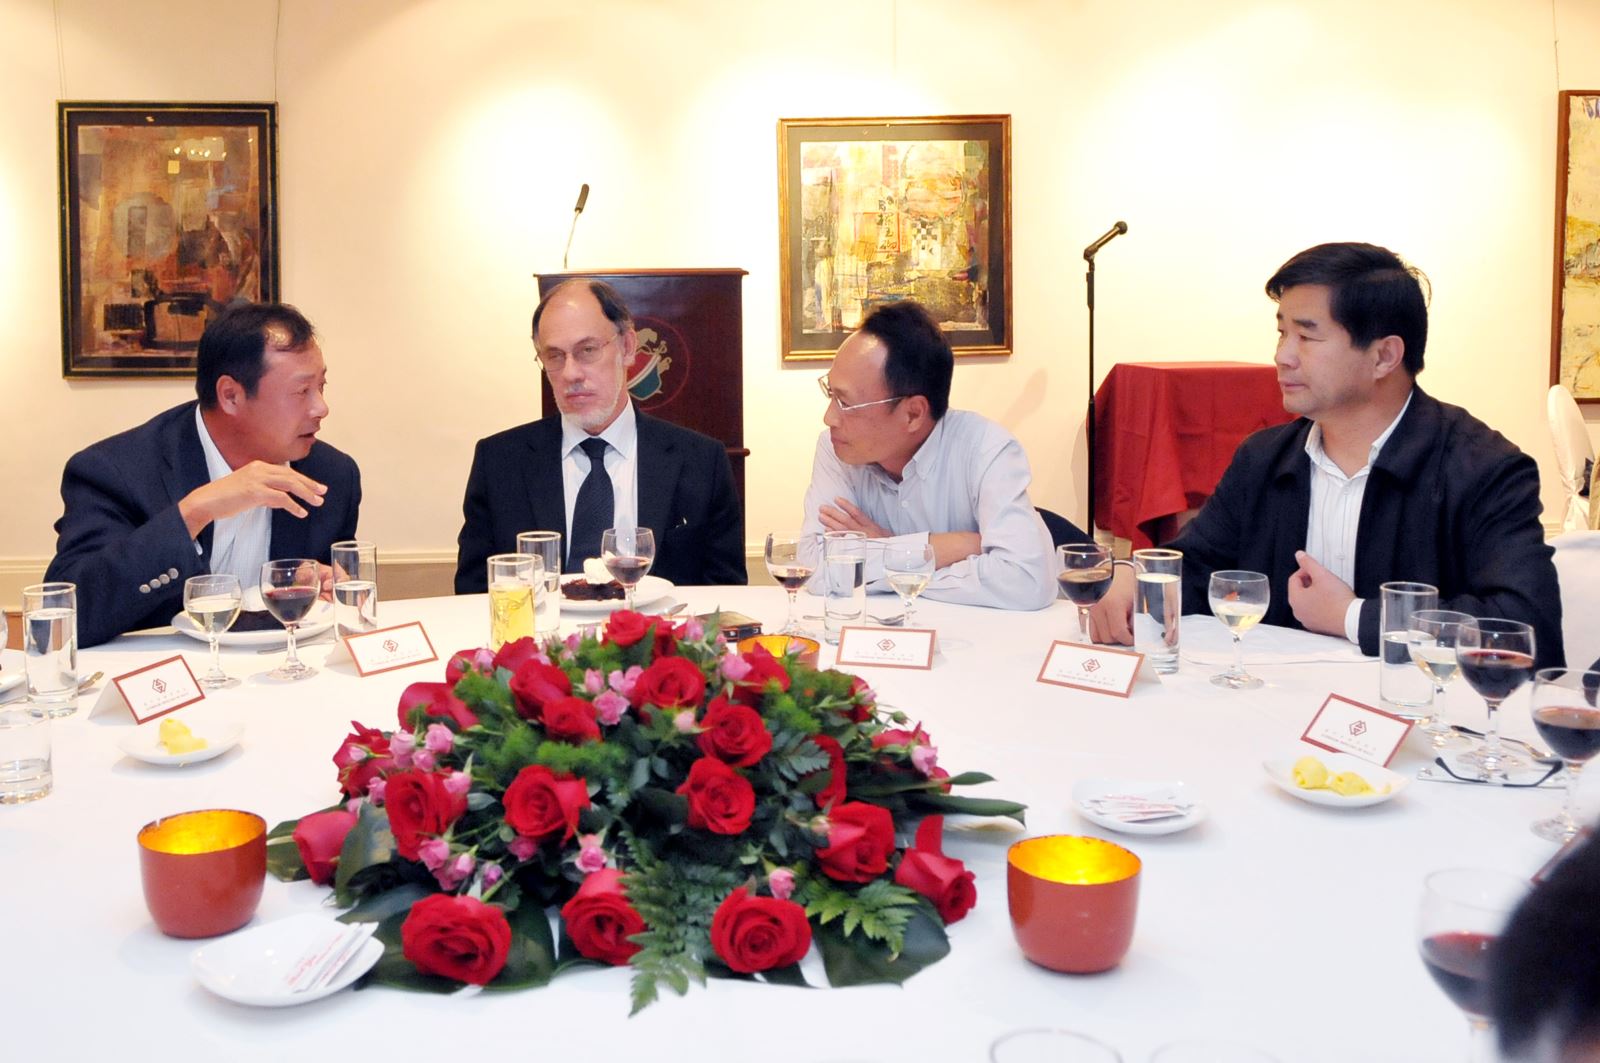 18th Cross-strait, Hong Kong & Macau Insurance Business Conference - Dinner hosted by Monetary Authority of Macao